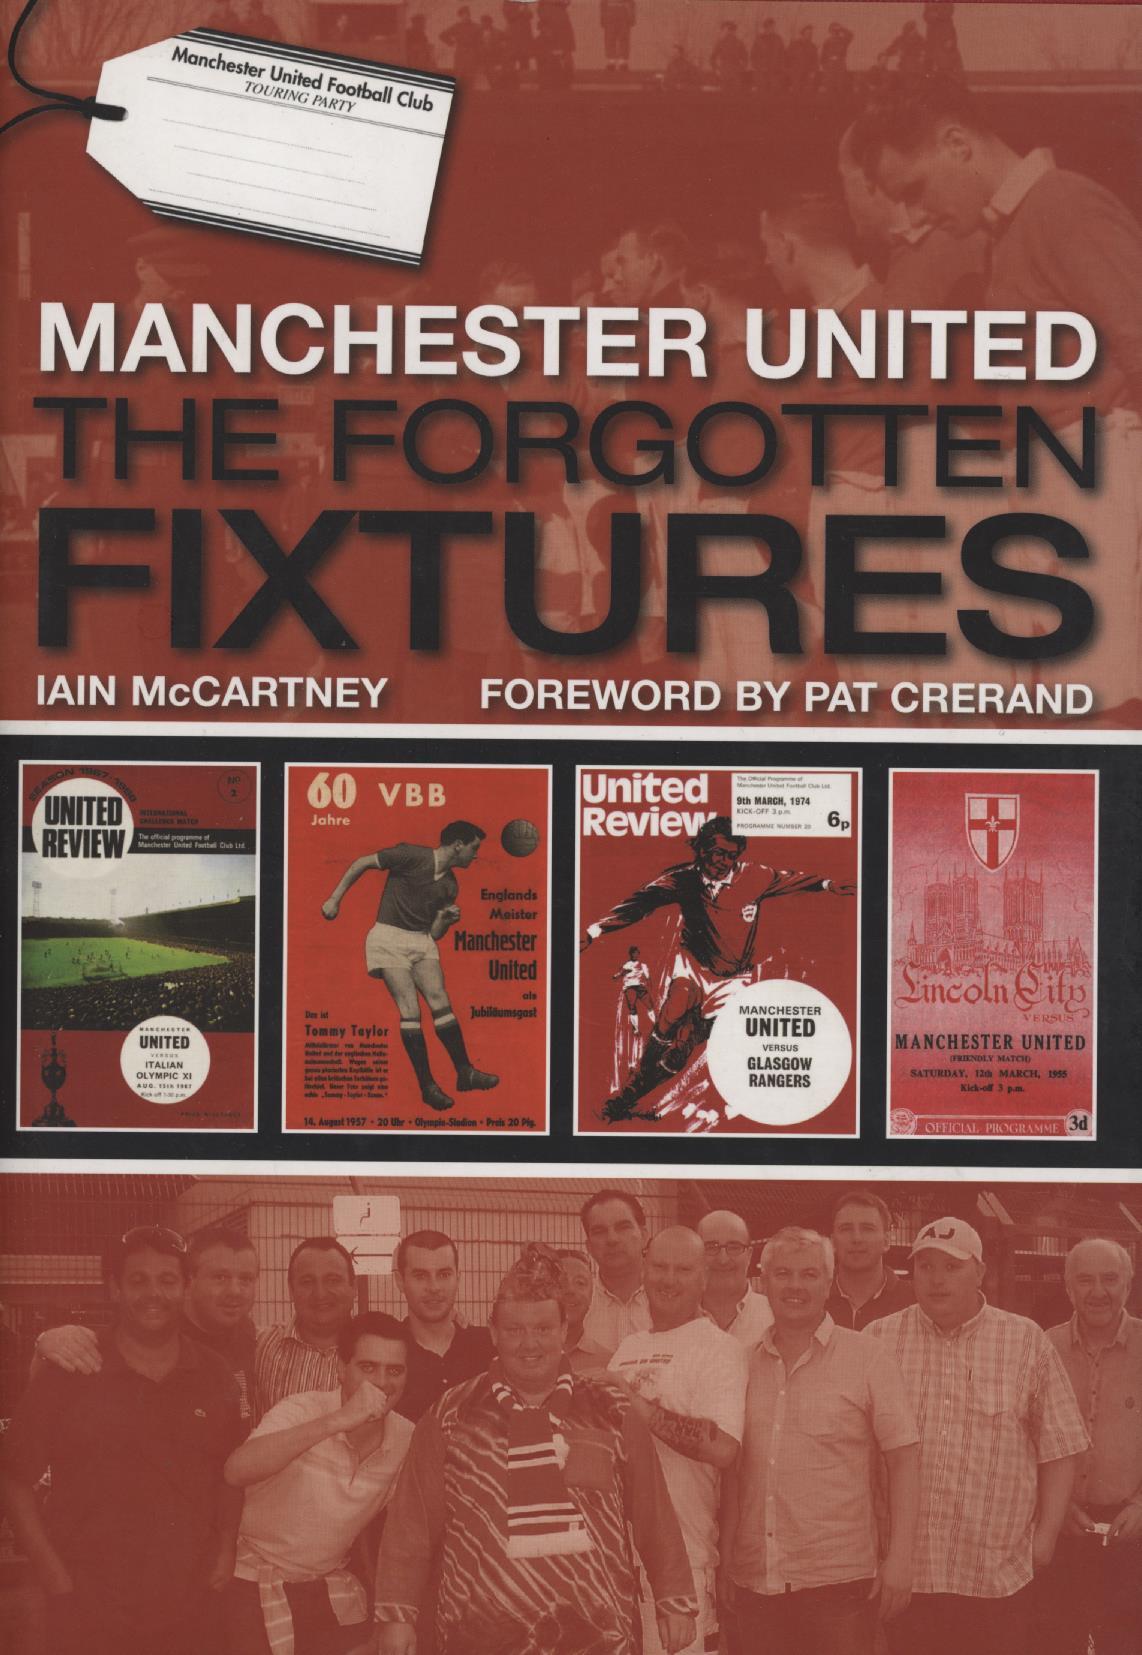 MANCHESTER UNITED - THE FORGOTTEN FIXTURES - Football Club History